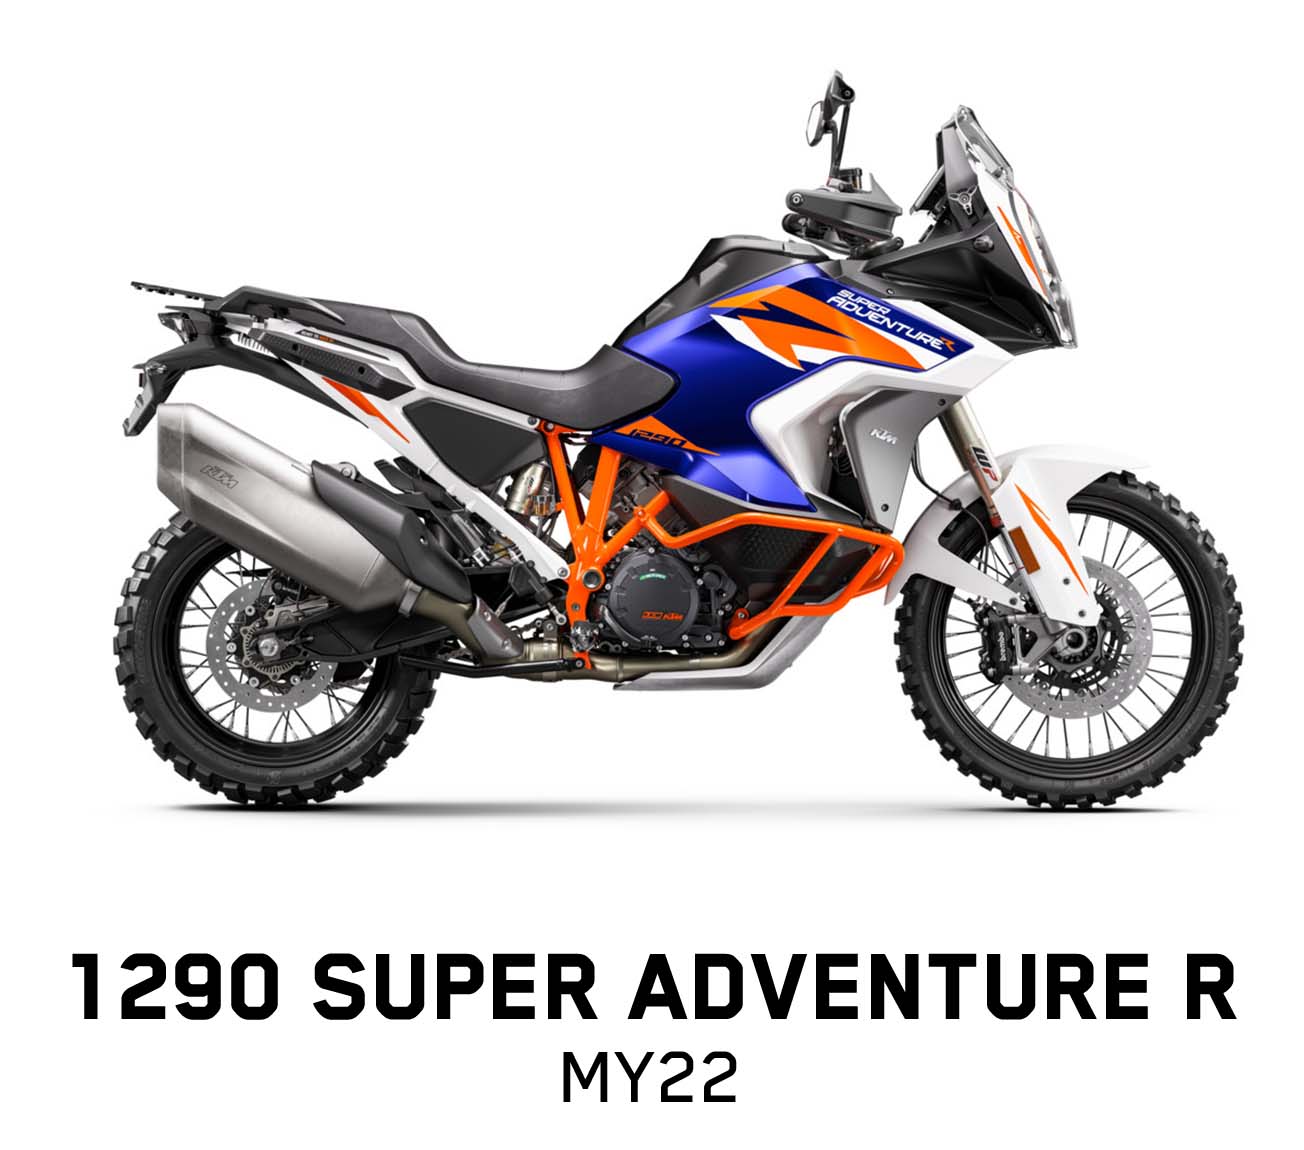 Laguna Exclusive KTM Tech Pack Offer on the 1290 Super Adventure R